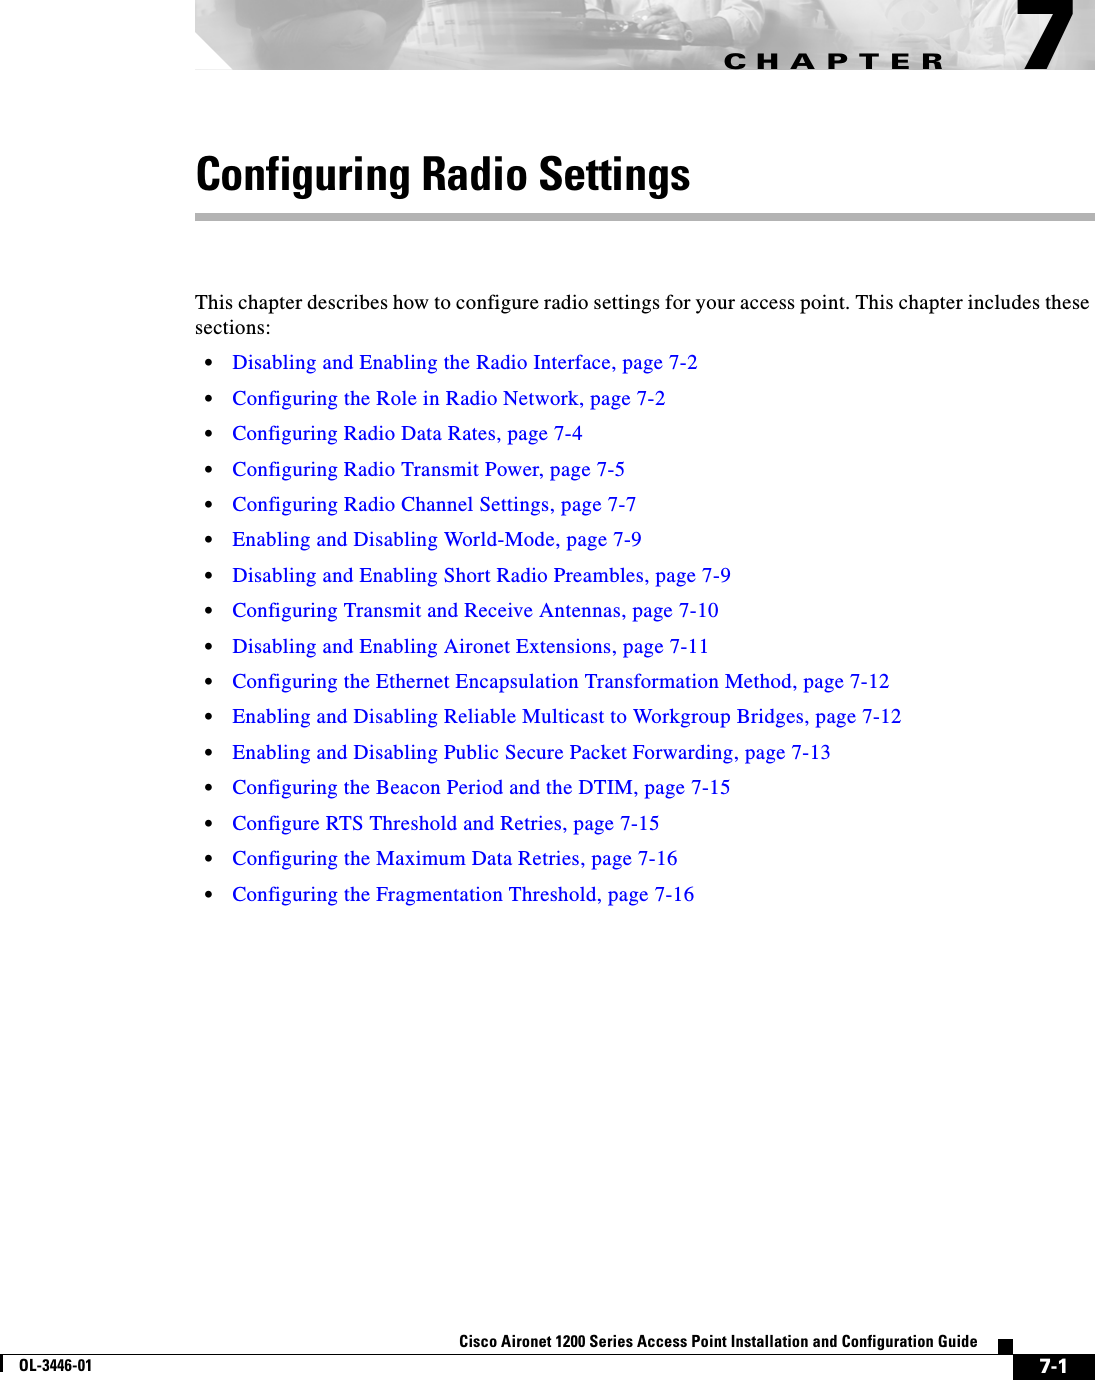 CHAPTER7-1Cisco Aironet 1200 Series Access Point Installation and Configuration GuideOL-3446-017Configuring Radio SettingsThis chapter describes how to configure radio settings for your access point. This chapter includes these sections:•Disabling and Enabling the Radio Interface, page 7-2•Configuring the Role in Radio Network, page 7-2•Configuring Radio Data Rates, page 7-4•Configuring Radio Transmit Power, page 7-5•Configuring Radio Channel Settings, page 7-7•Enabling and Disabling World-Mode, page 7-9•Disabling and Enabling Short Radio Preambles, page 7-9•Configuring Transmit and Receive Antennas, page 7-10•Disabling and Enabling Aironet Extensions, page 7-11•Configuring the Ethernet Encapsulation Transformation Method, page 7-12•Enabling and Disabling Reliable Multicast to Workgroup Bridges, page 7-12•Enabling and Disabling Public Secure Packet Forwarding, page 7-13•Configuring the Beacon Period and the DTIM, page 7-15•Configure RTS Threshold and Retries, page 7-15•Configuring the Maximum Data Retries, page 7-16•Configuring the Fragmentation Threshold, page 7-16